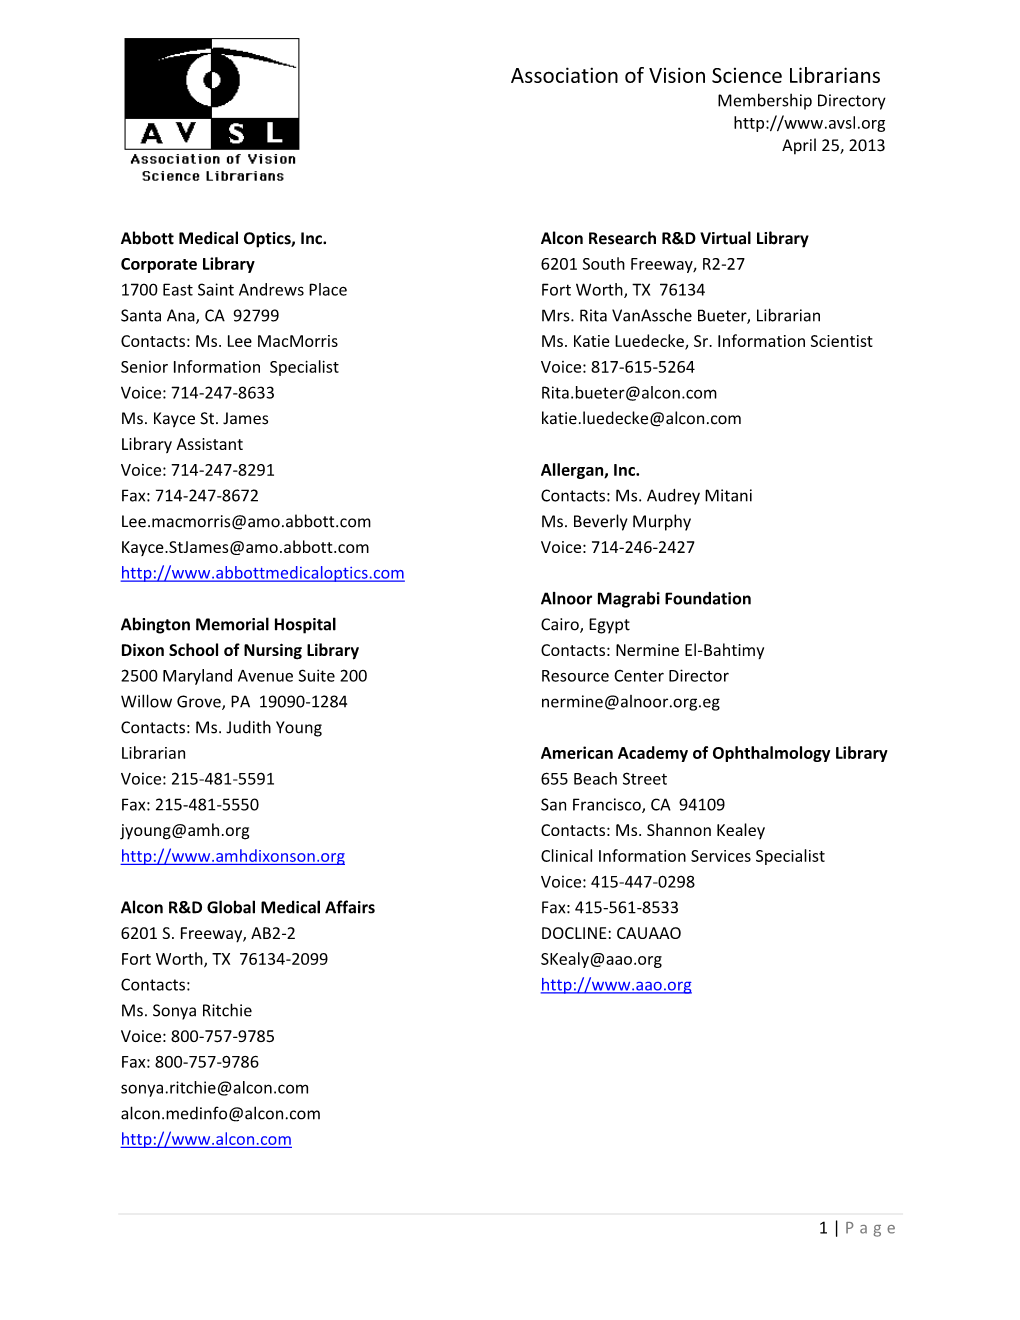 Association of Vision Science Librarians Membership Directory April 25, 2013